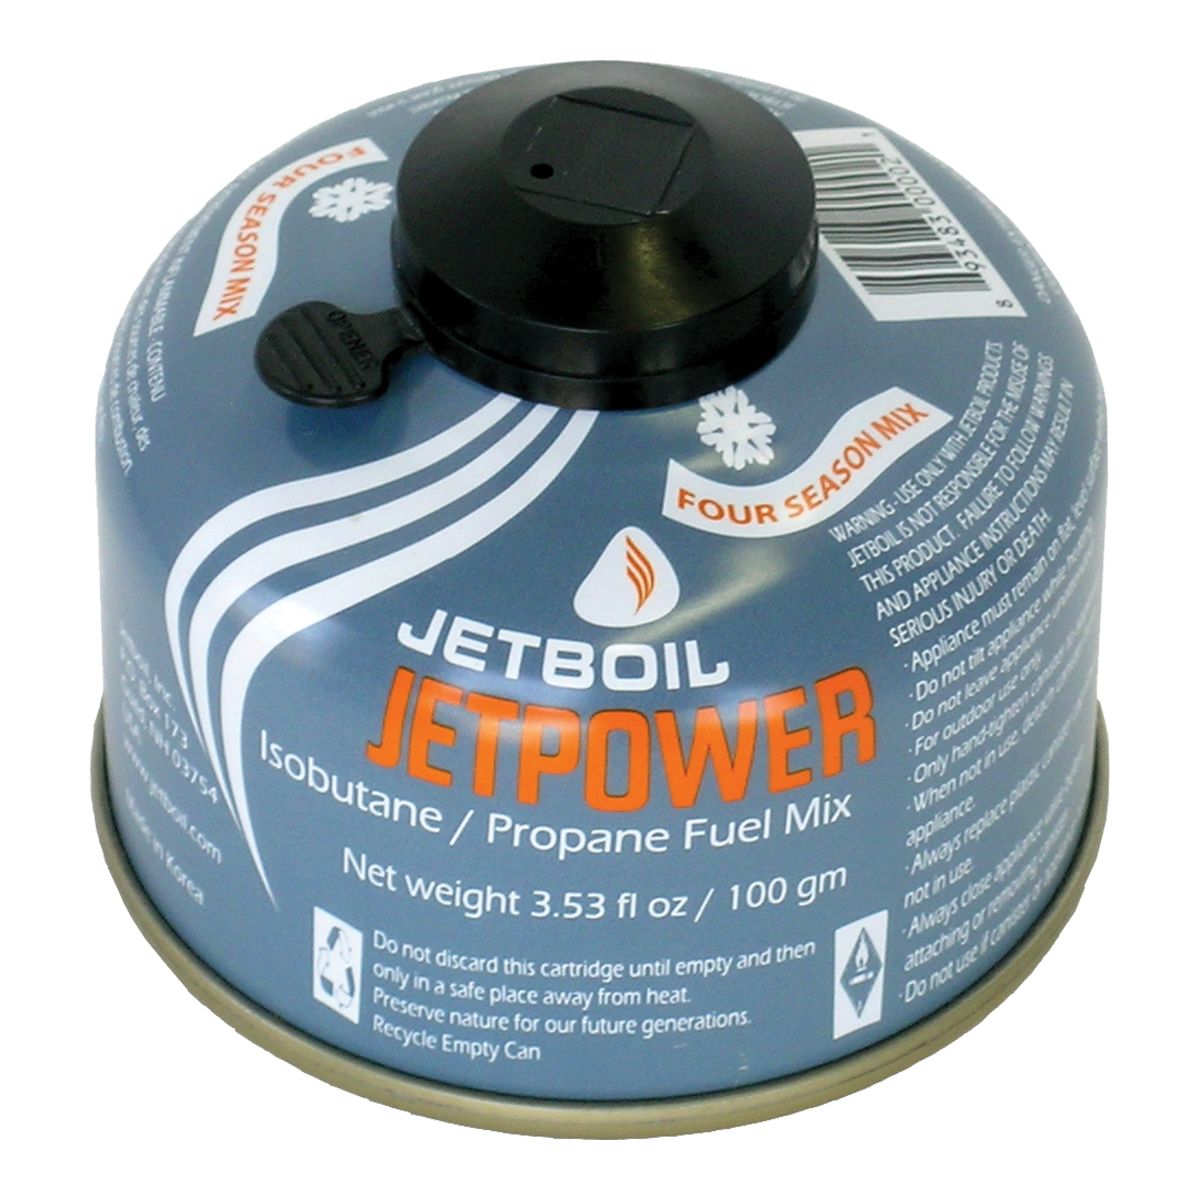 Image of JetBoil Jetpower Fuel Canister - 100g